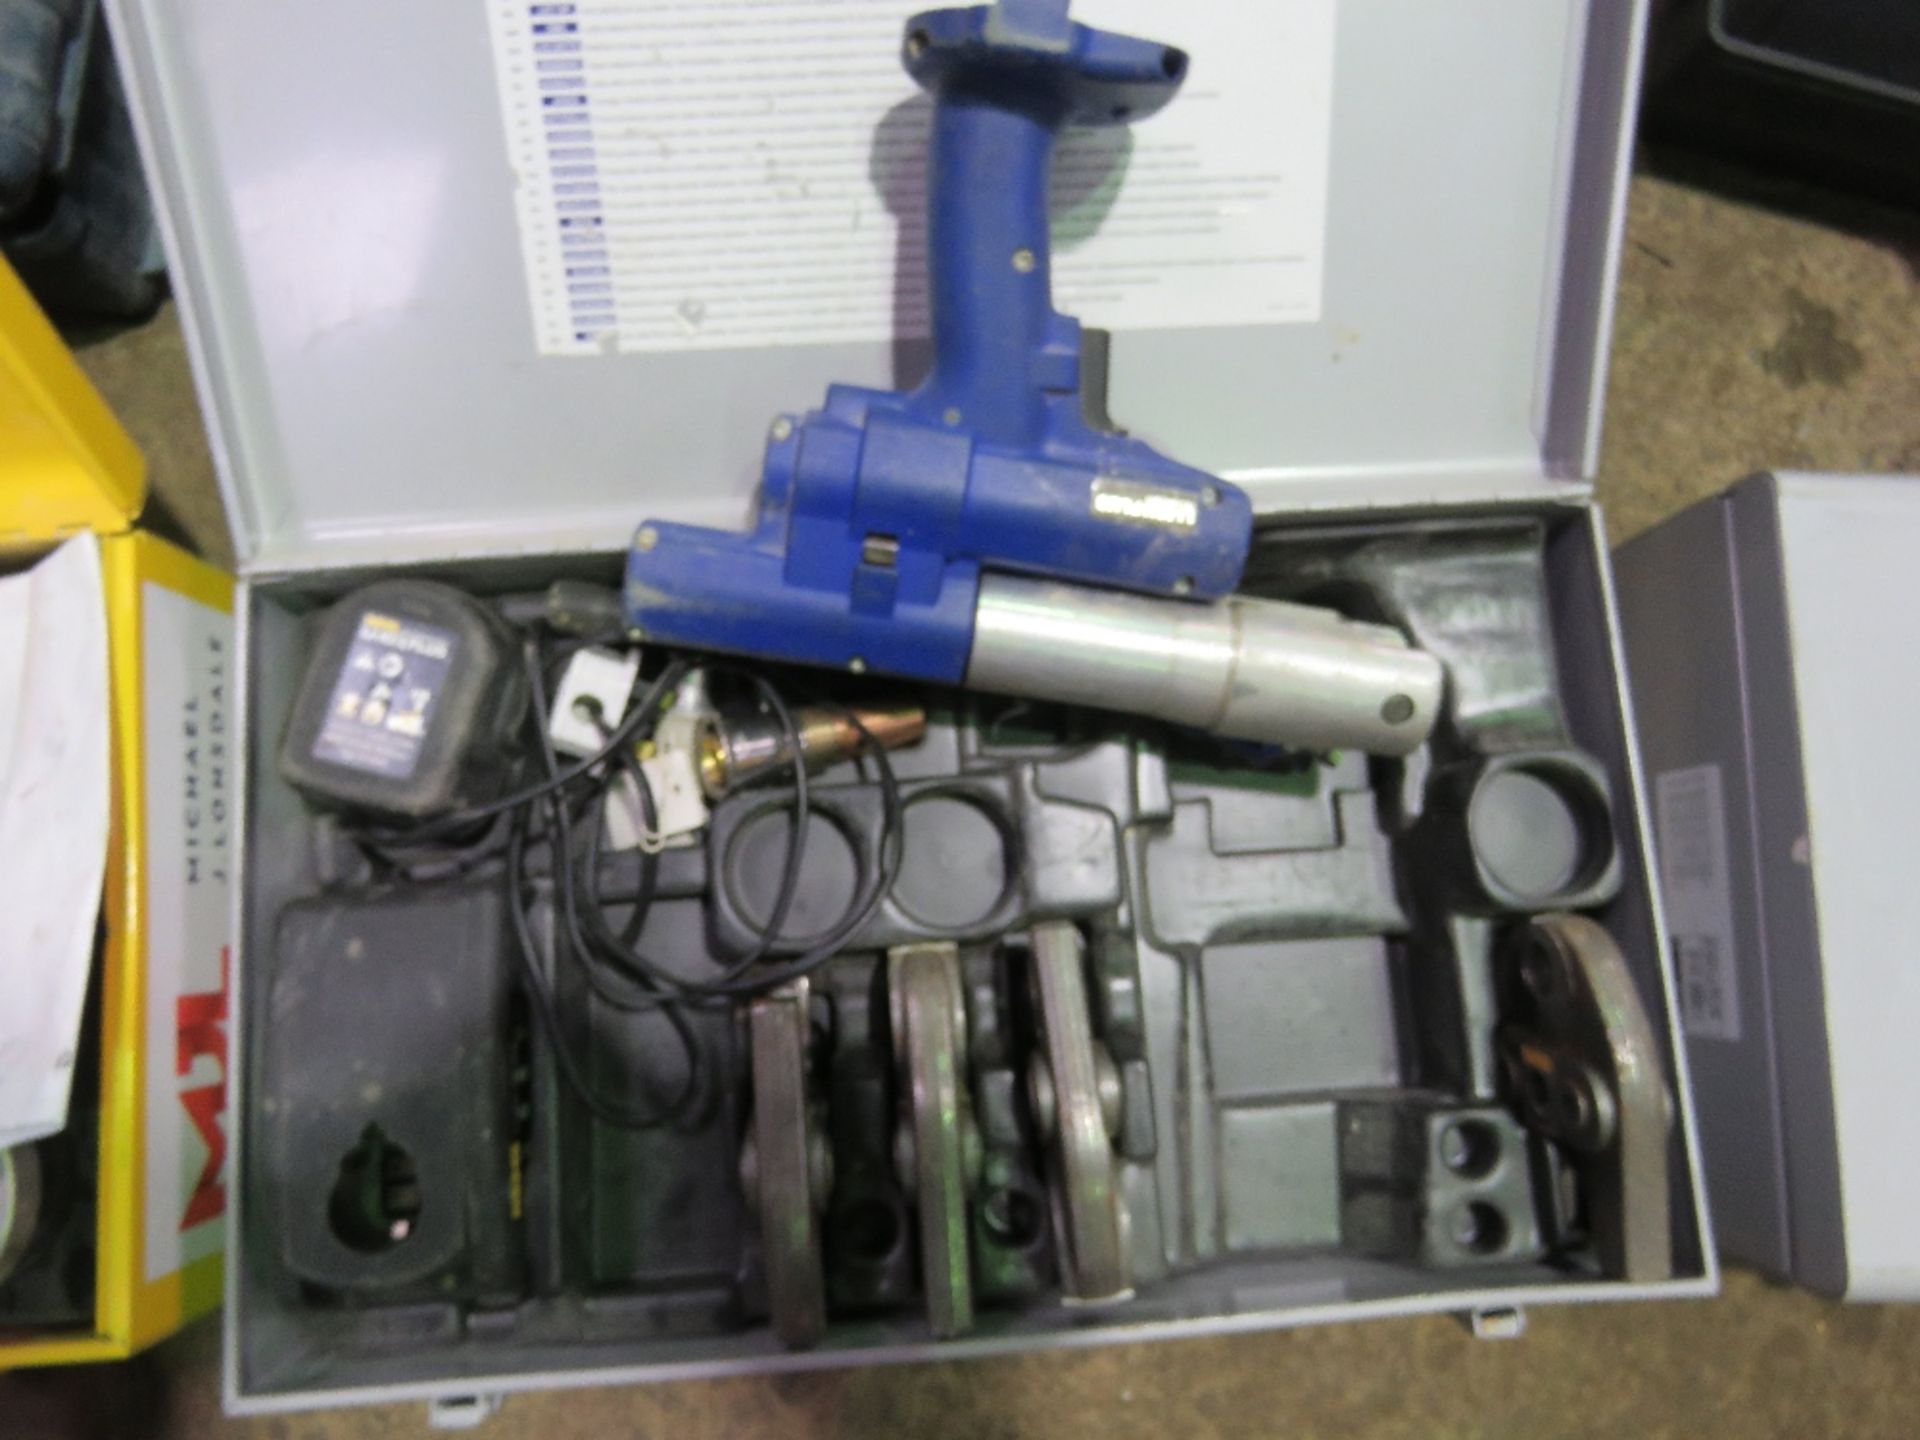 REMS MINI PRESS BATTERY CRIMPING PRESS SET IN A CASE. SOURCED FROM LARGE CONSTRUCTION COMPANY LIQUID - Image 2 of 3